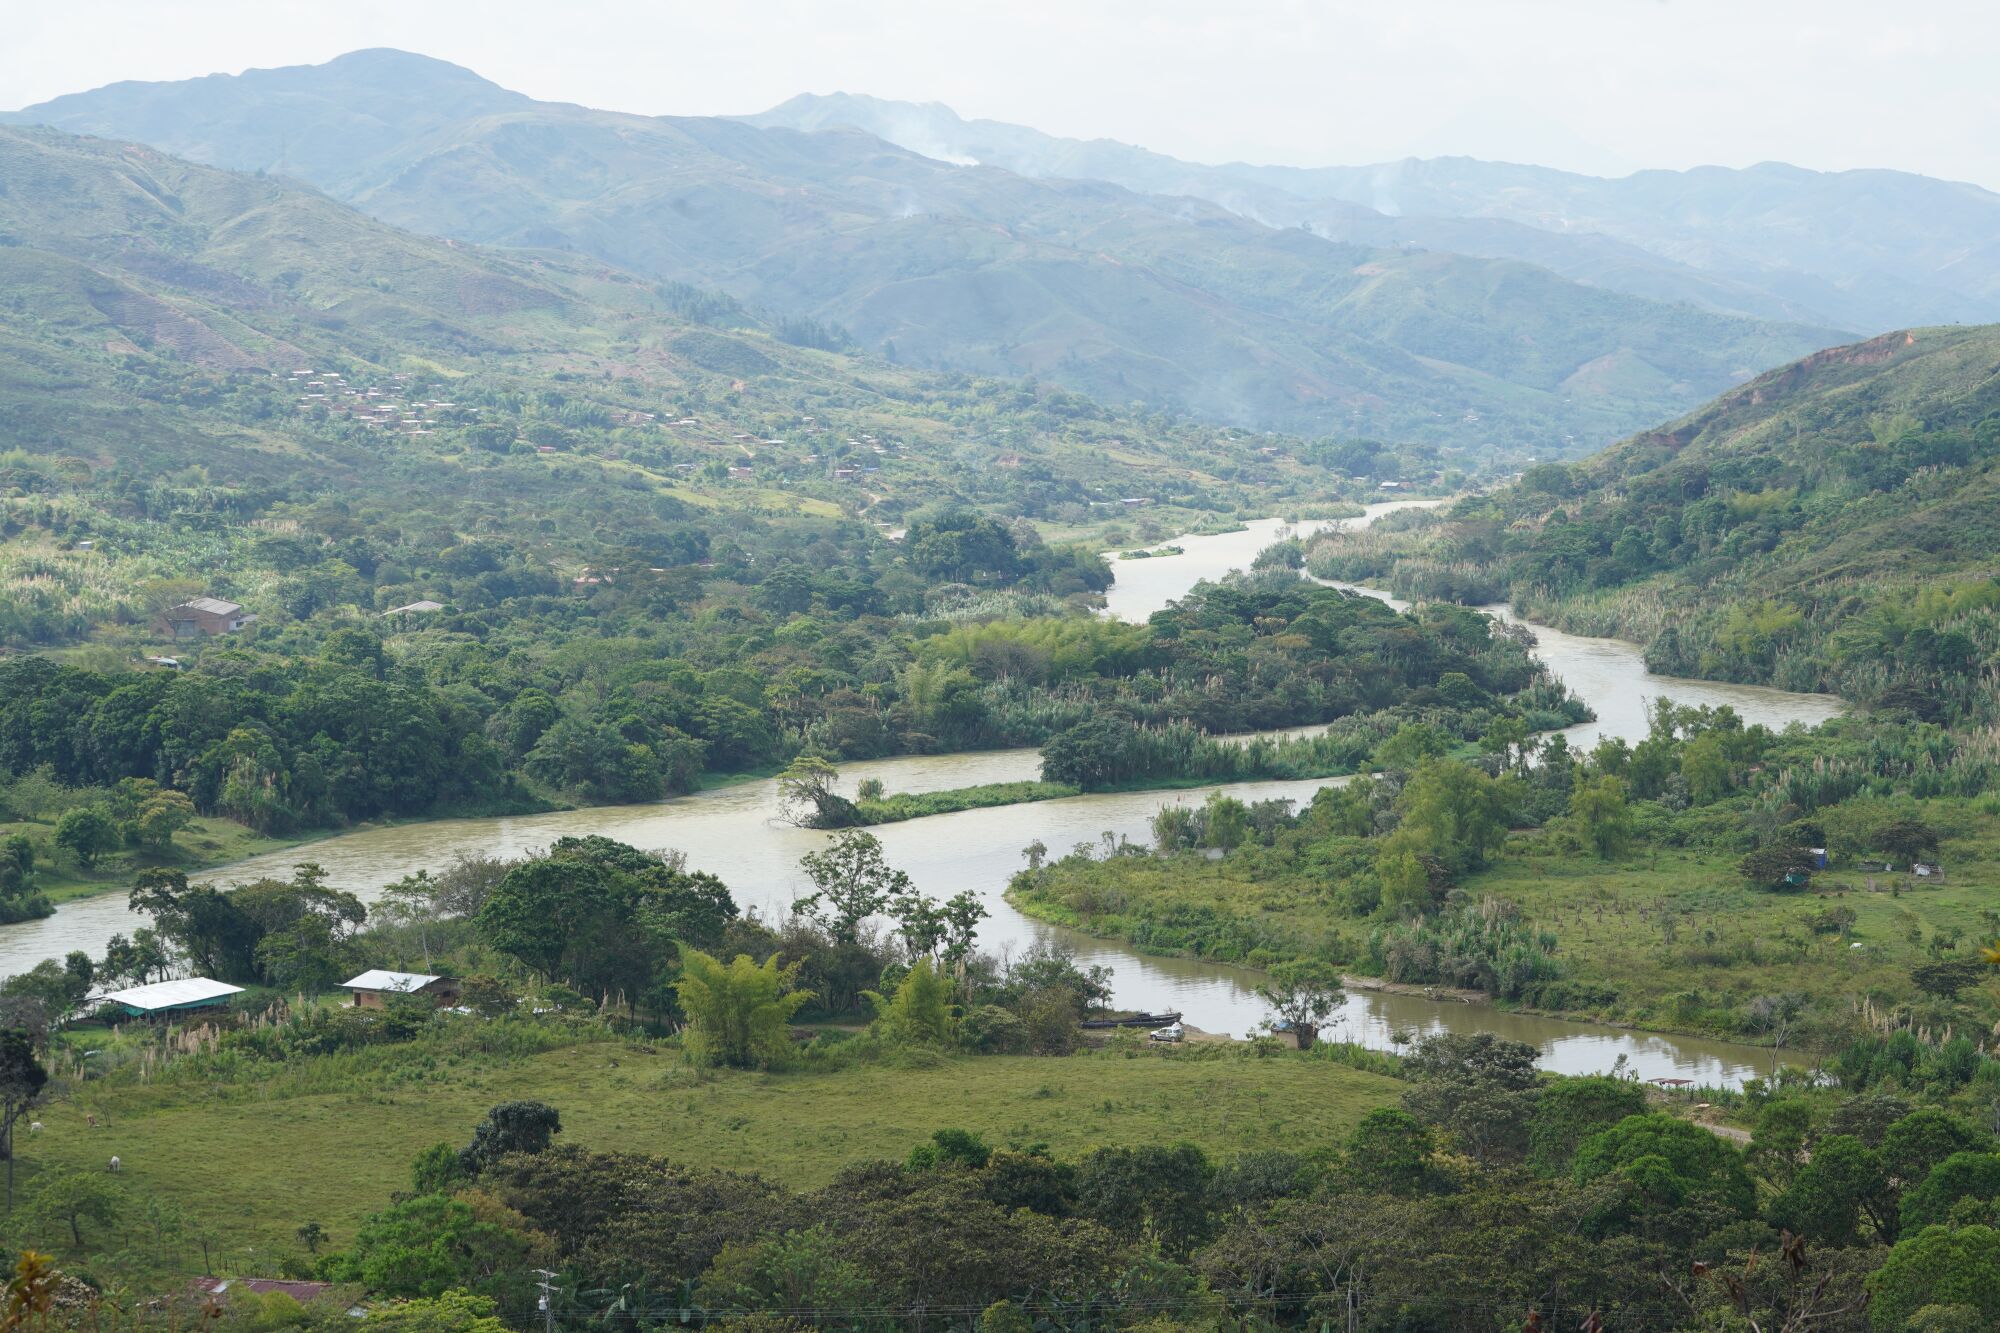 A view of La Toma, Colombia, includes waterways and green hills under an overcast sky